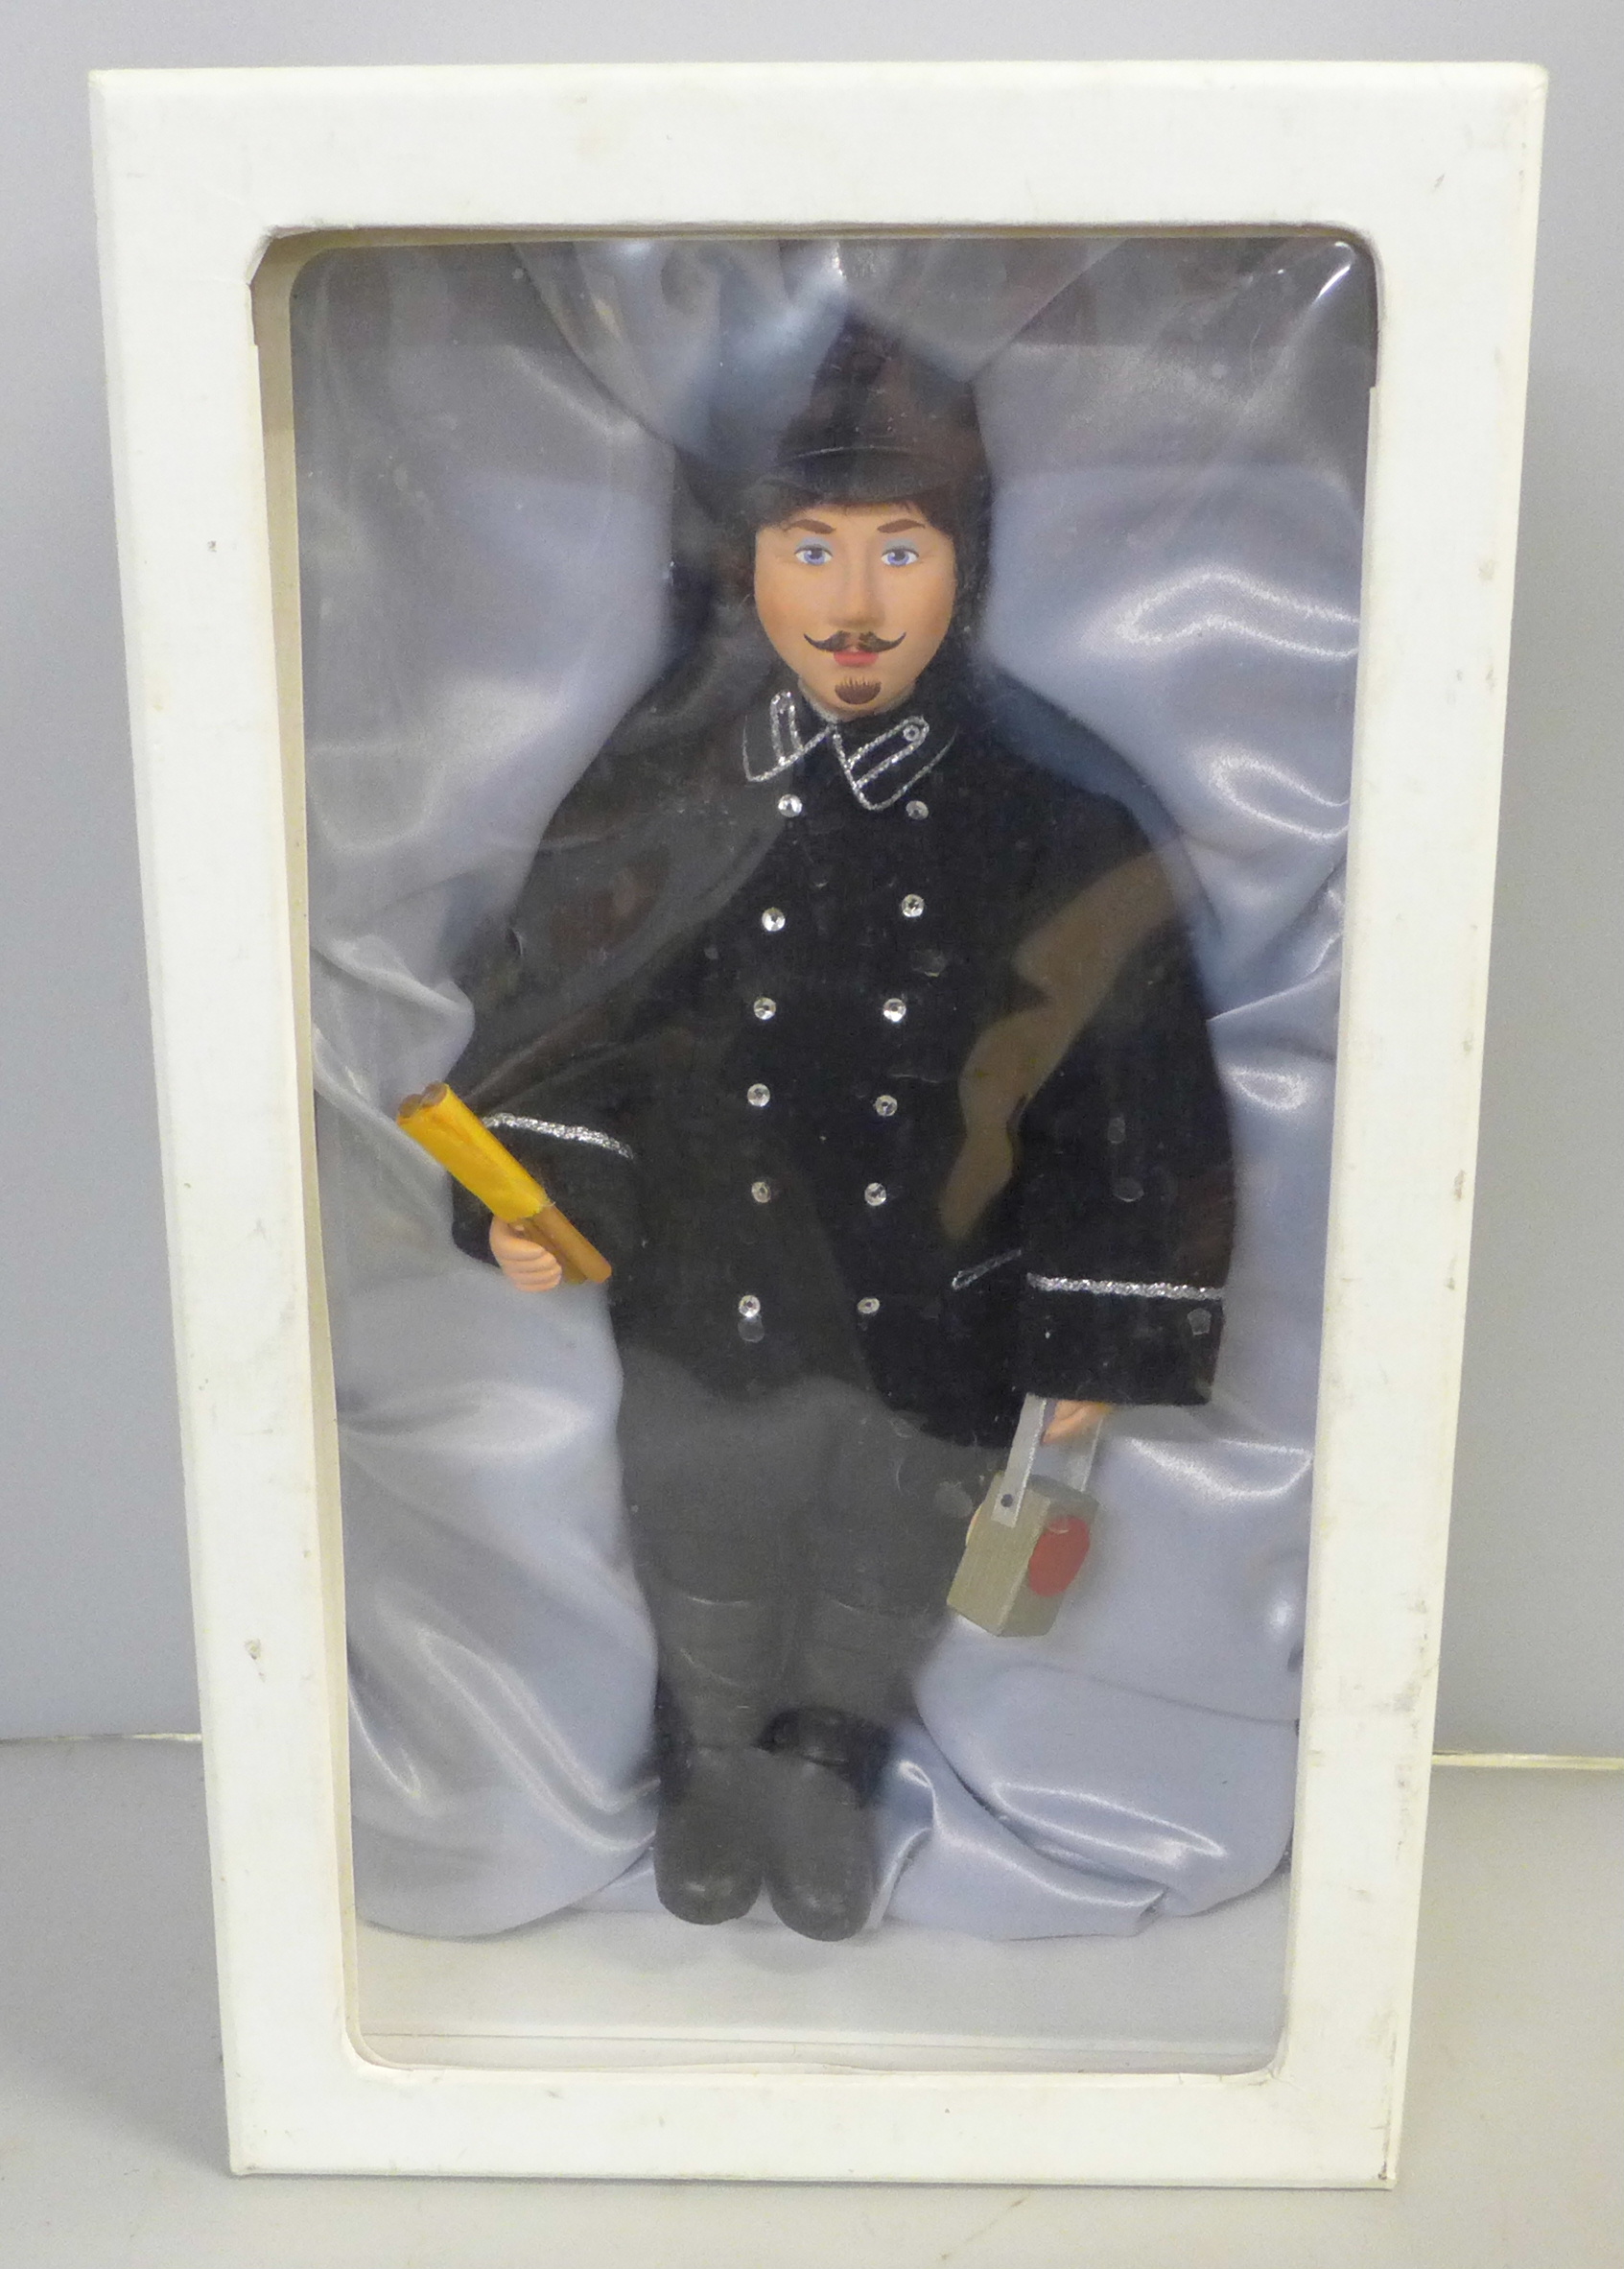 A doll of a Russian station master, 1960s/1970s in original box - Image 4 of 4